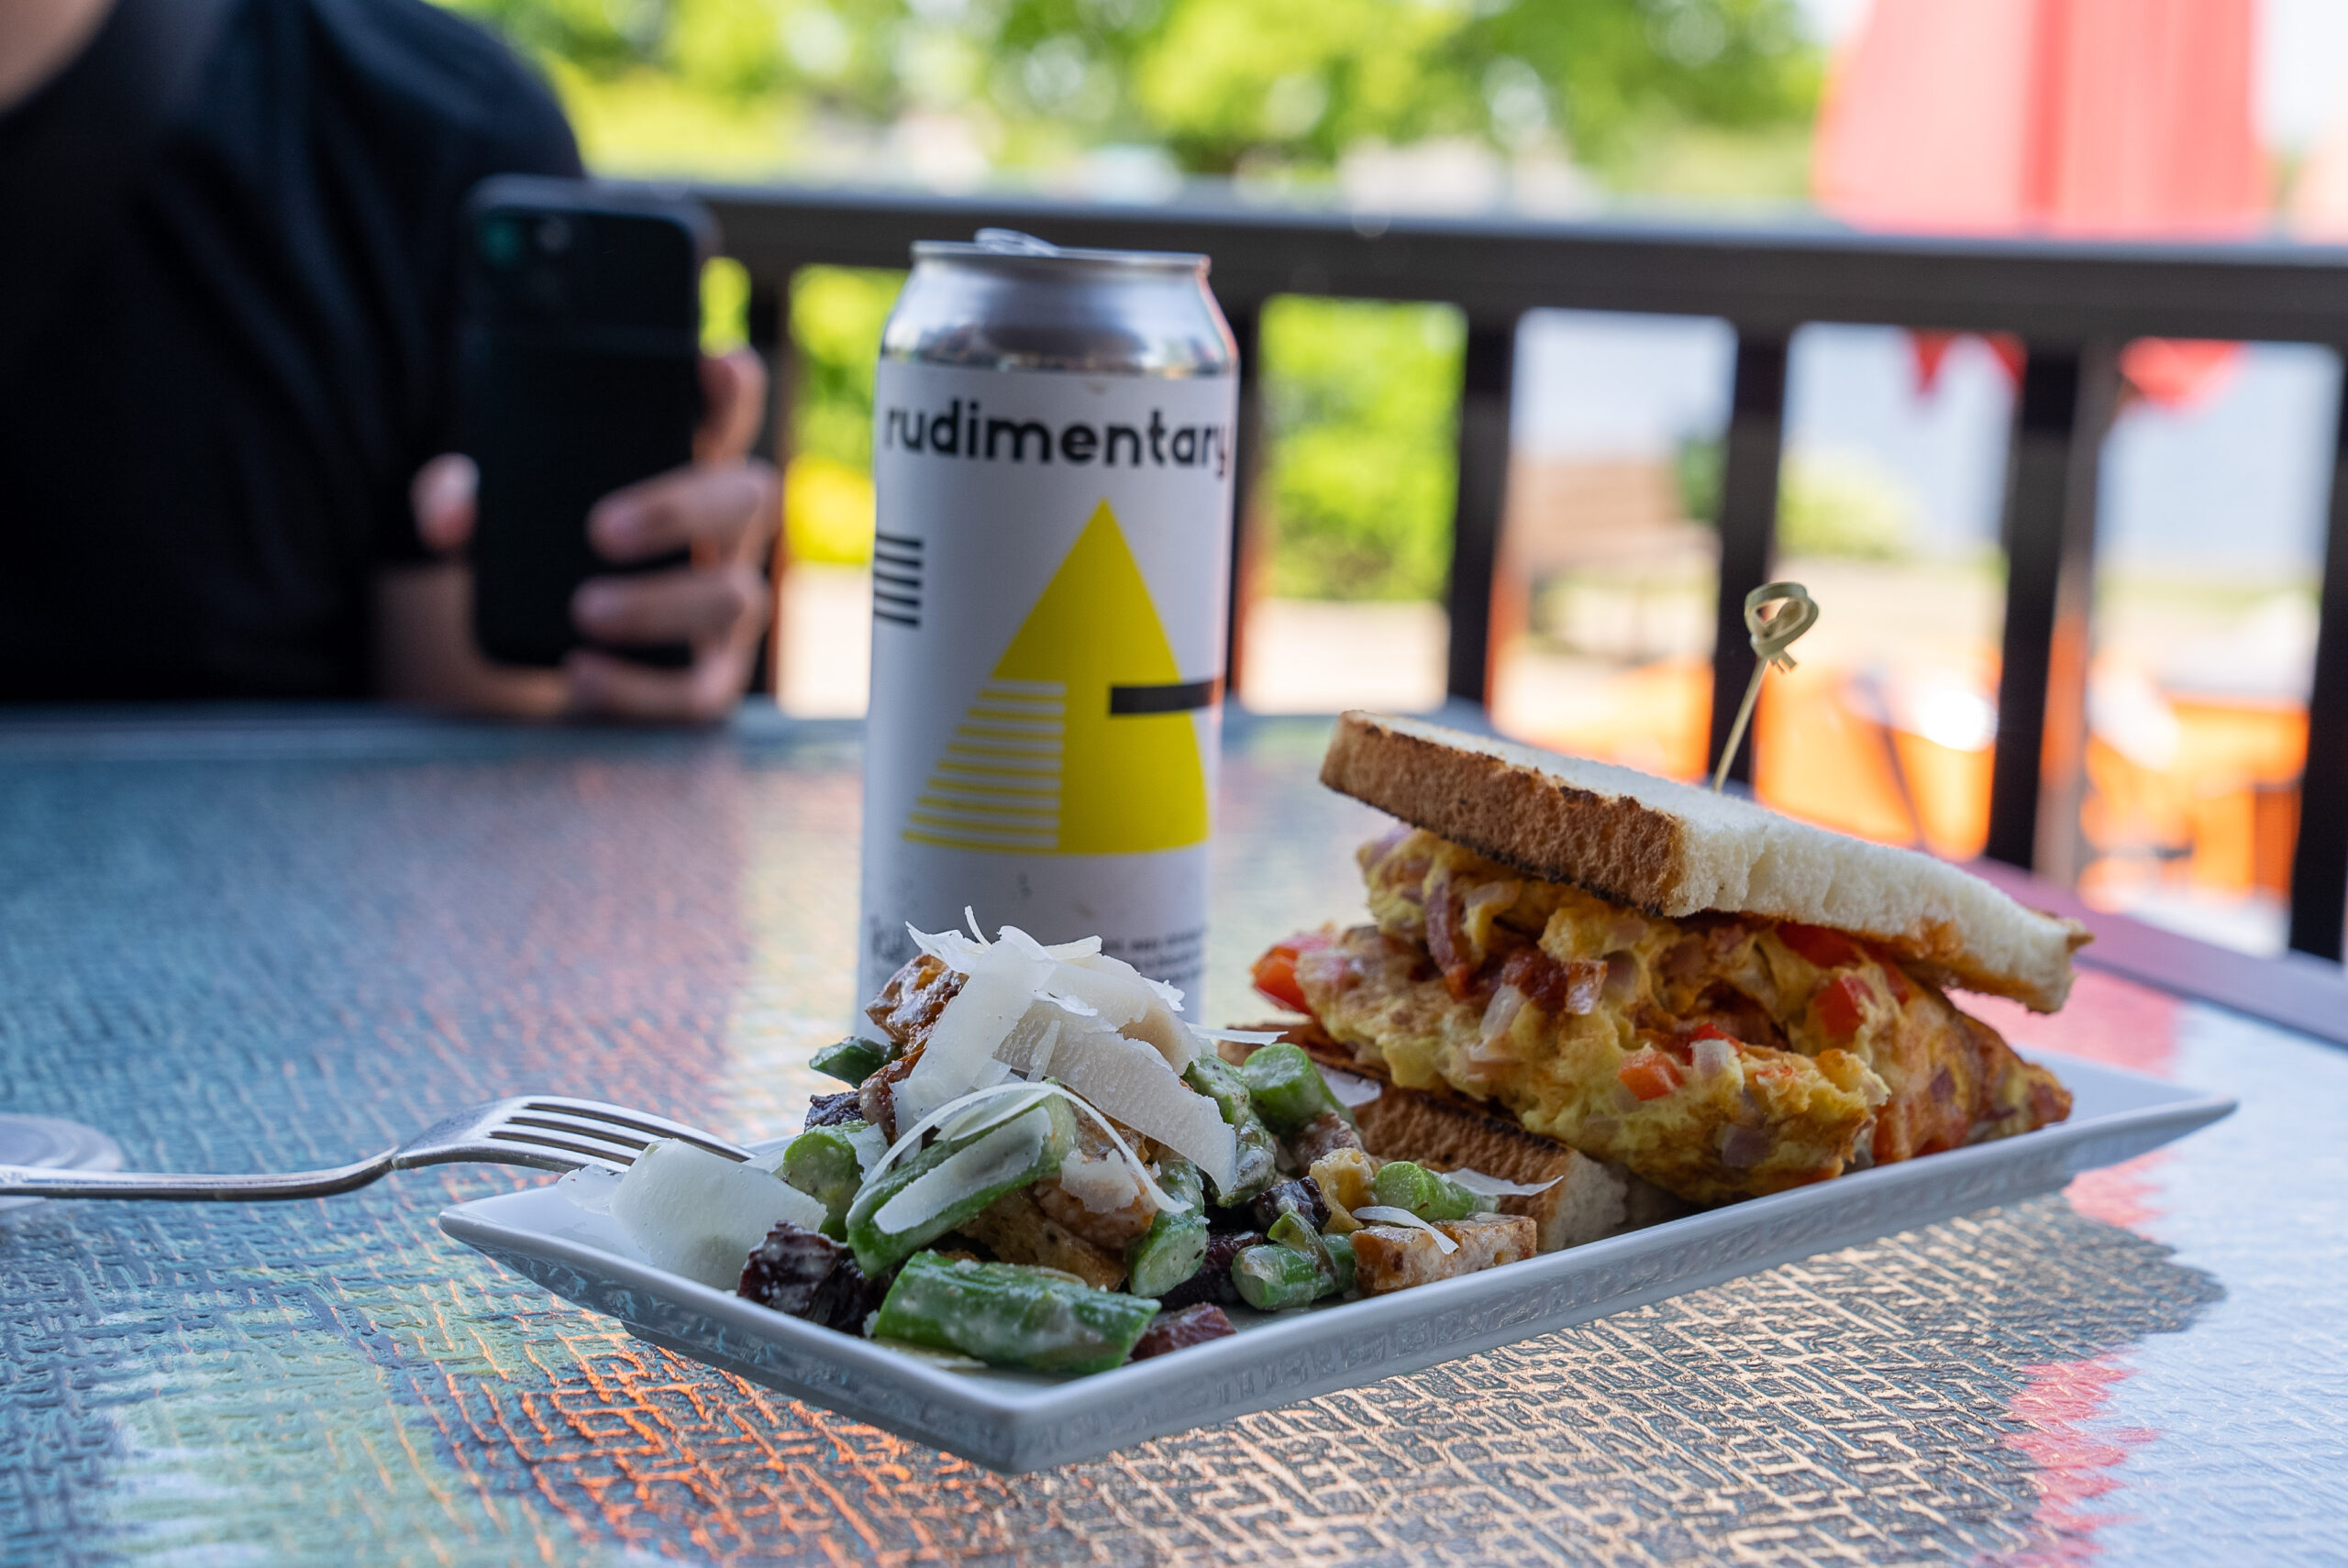 a sandwich, salad and can of craft beer sitting on a patio table